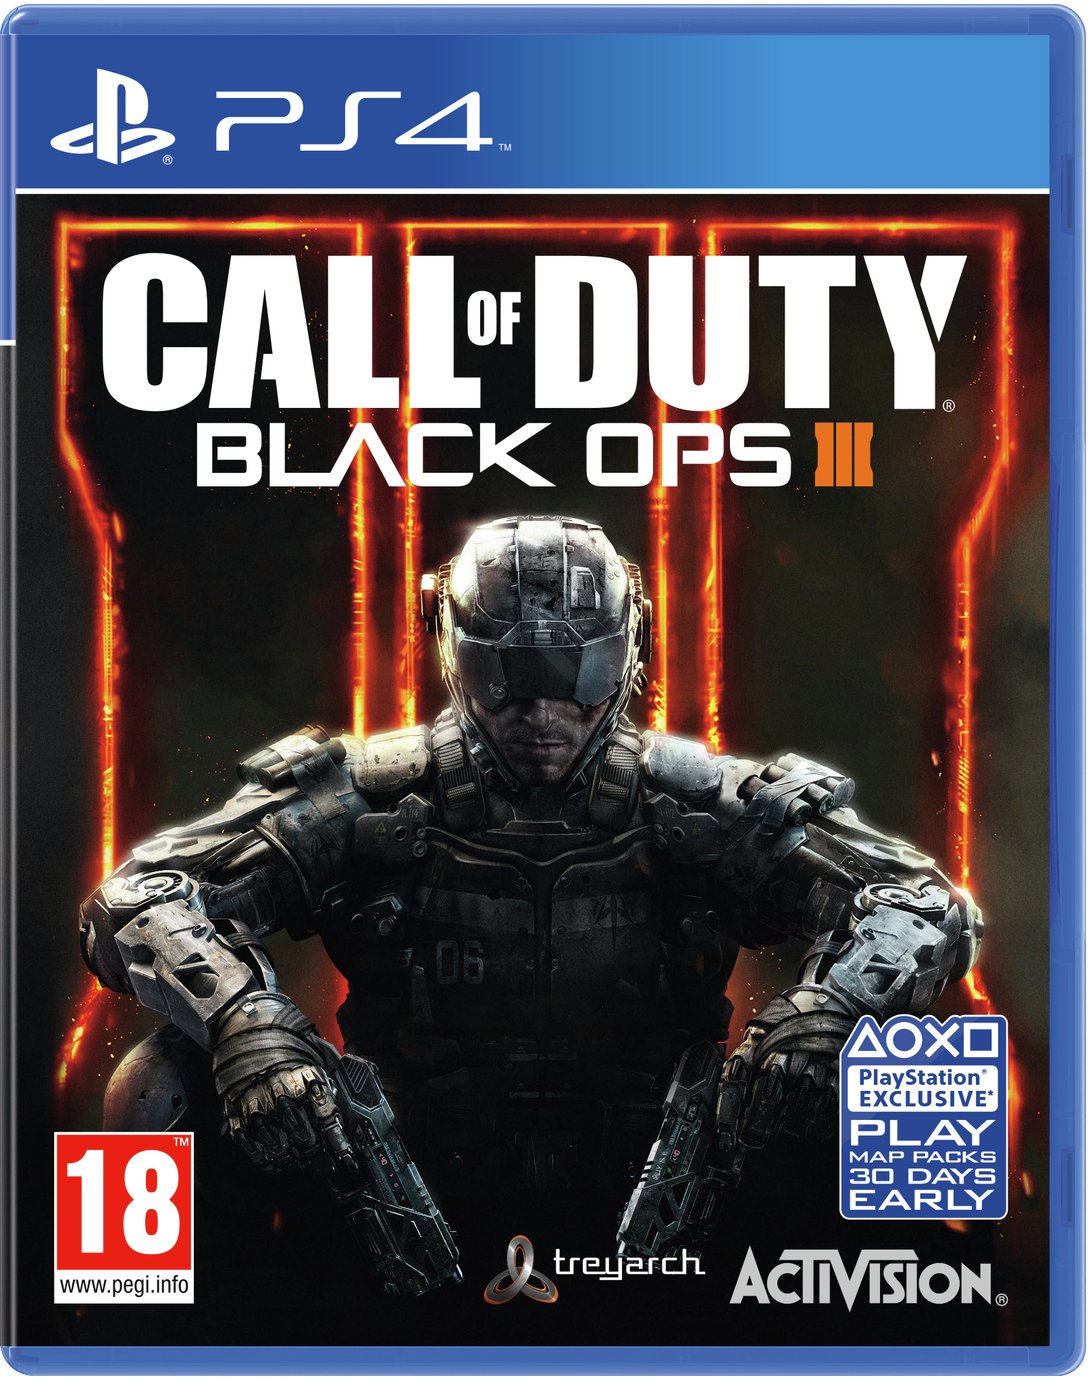 Call of Duty Black Ops III PS4 Game Reviews